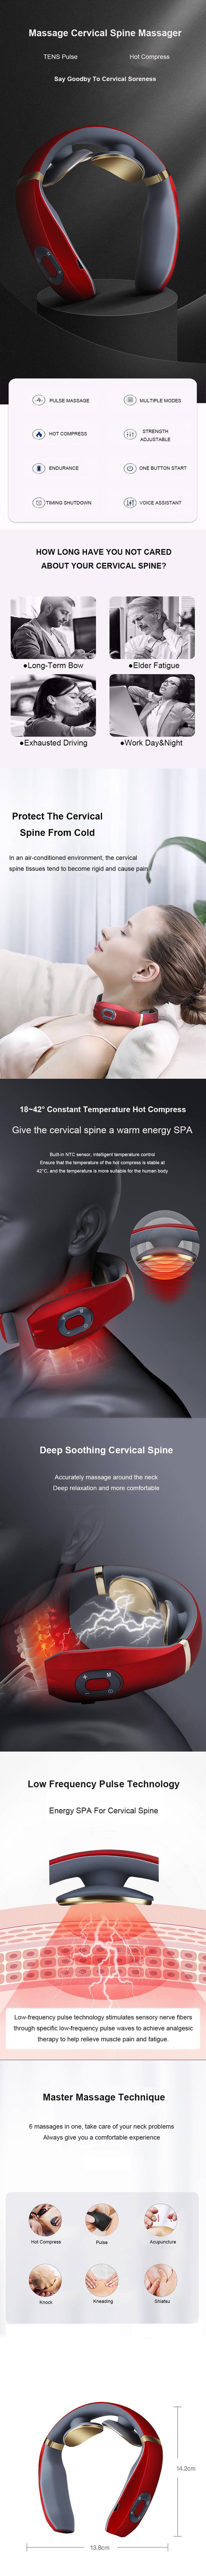 Electric-Neck-Massager-Magnetic-Pulse-Therapy-Intelligent-Neck-Protector-USB-Rechargable-Body-Relax--1712002-1